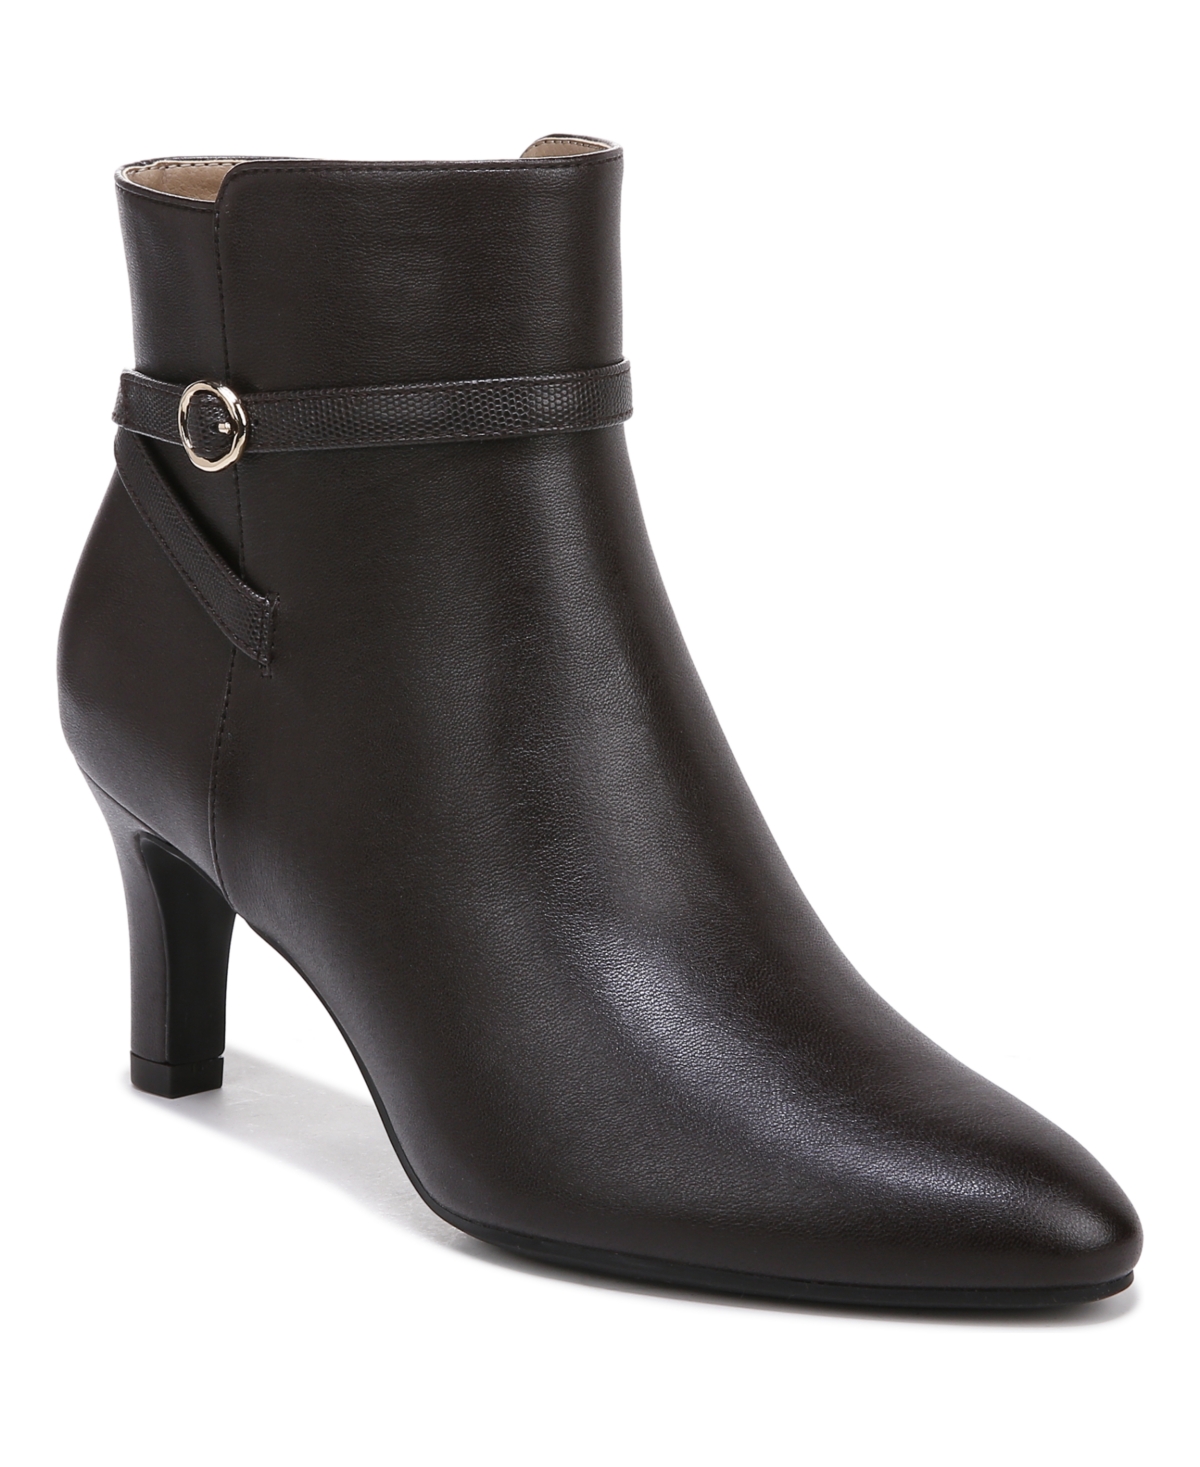 Guild Booties - Dark Chocolate Faux Leather